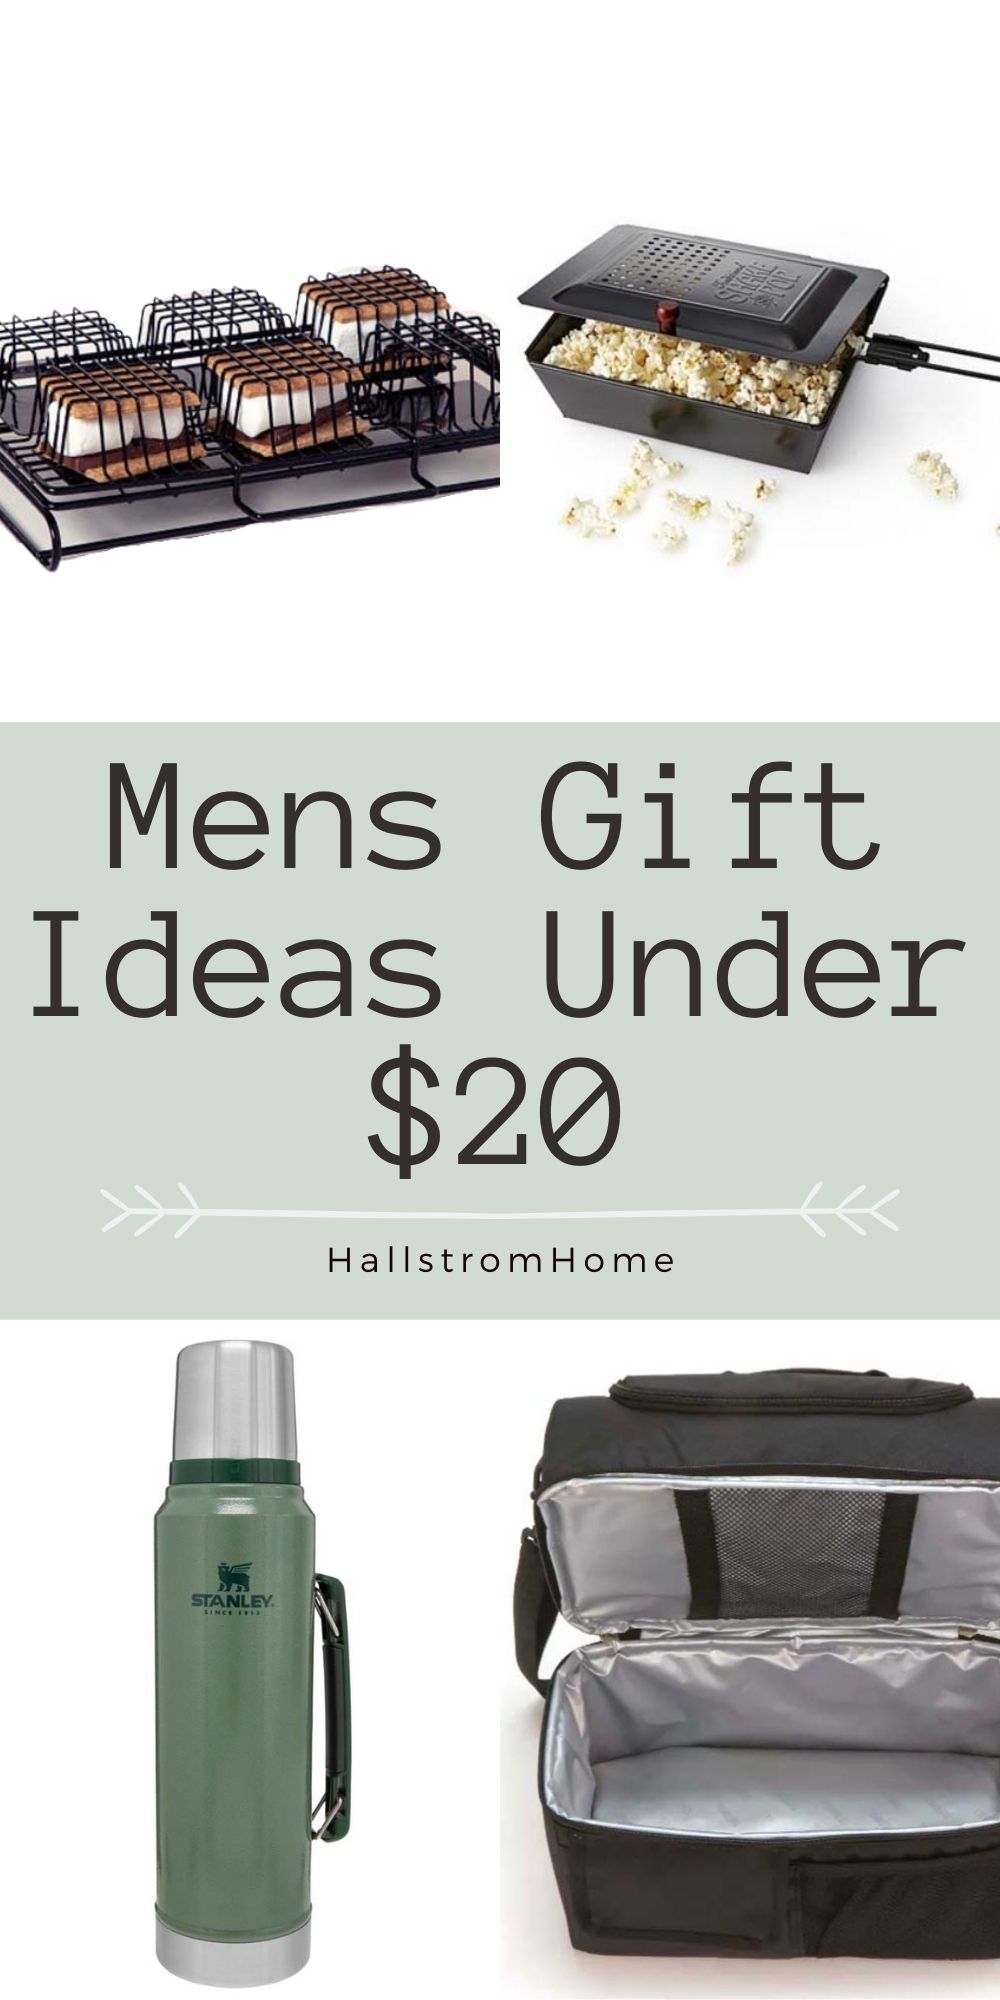 GIFTS FOR MEN THAT DON'T SUCK! | 40 + Gift Ideas for Men Under $50! -  YouTube